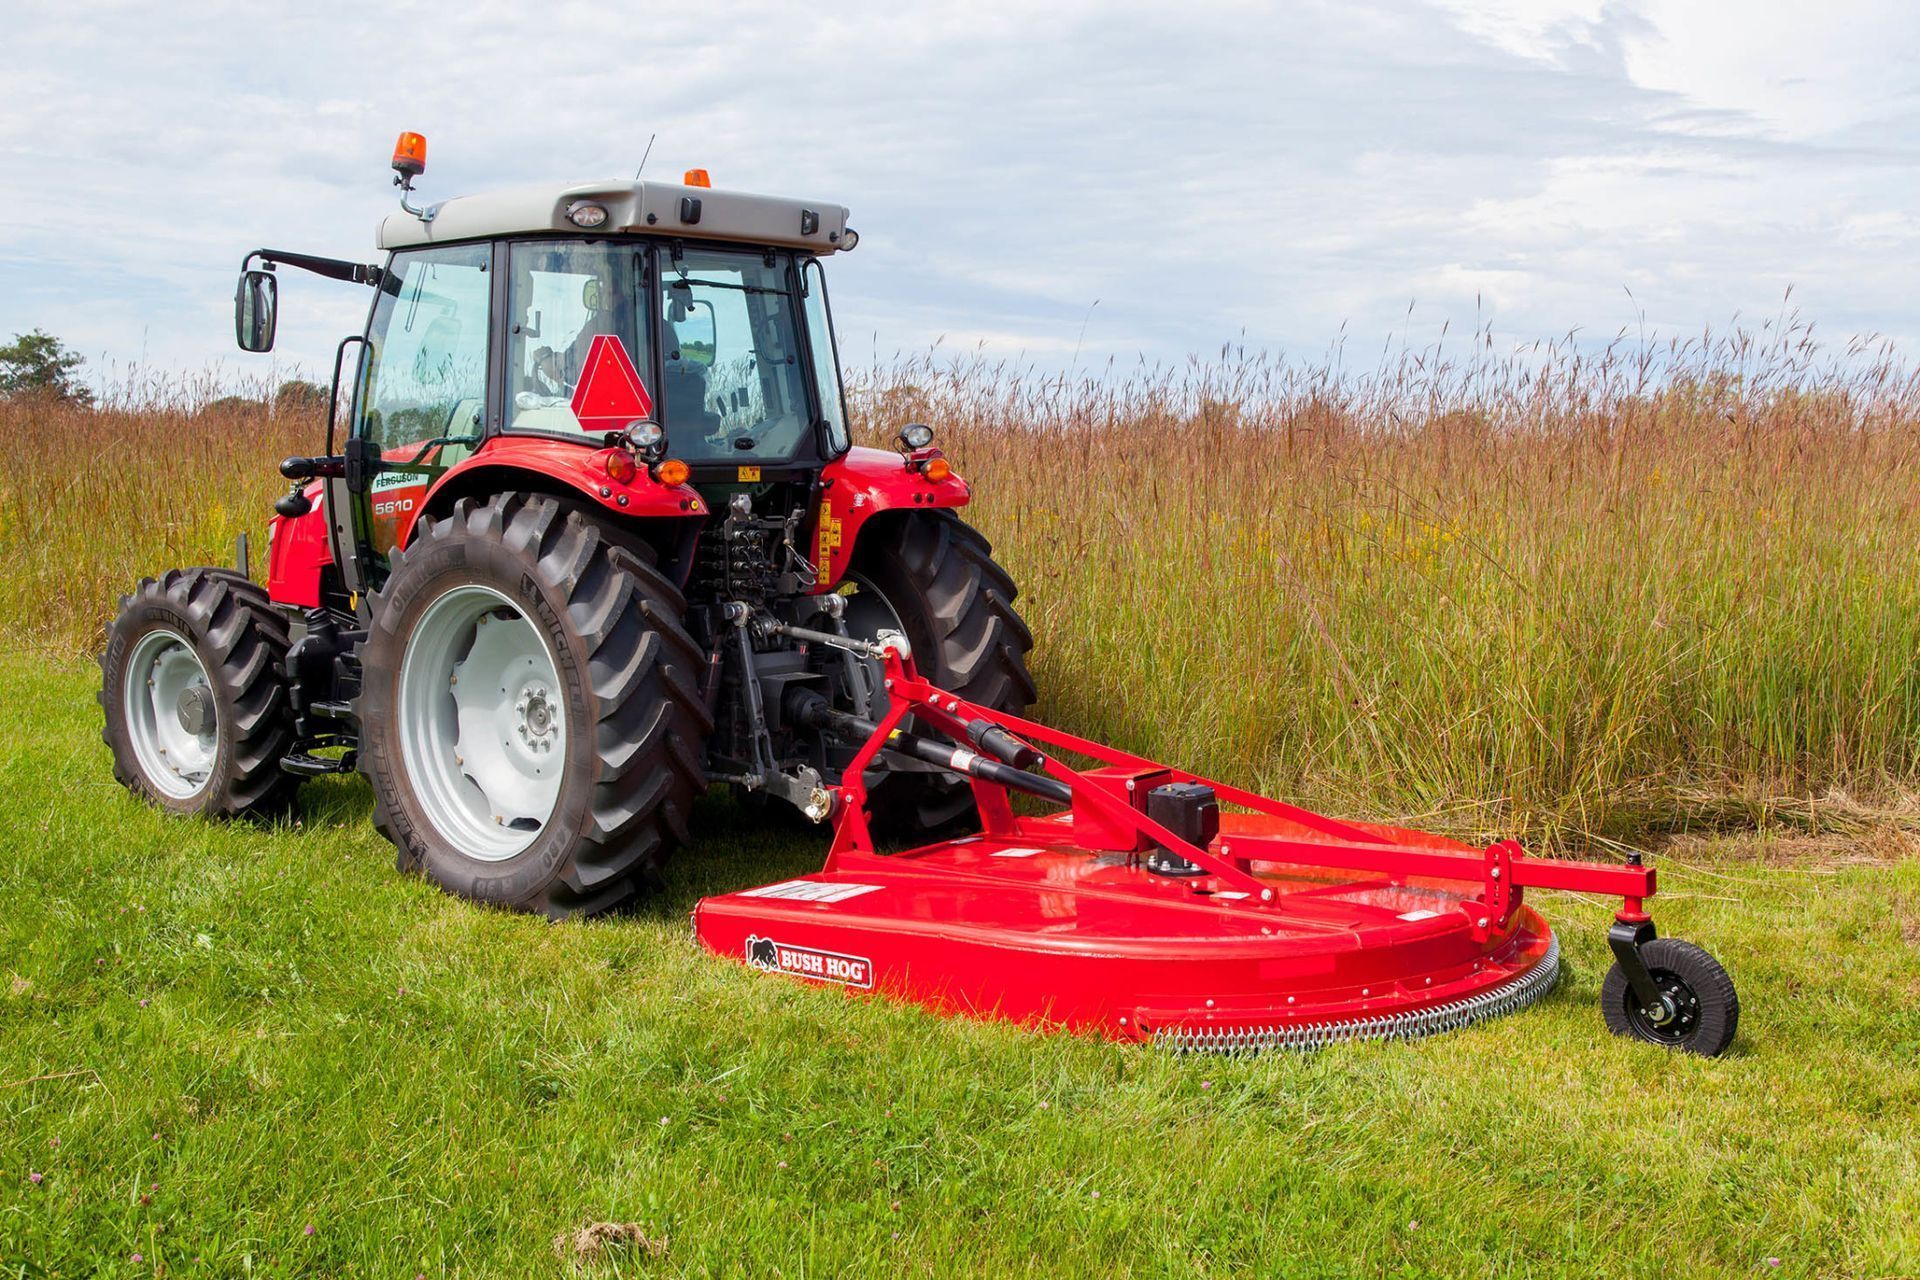 A red tractor is cutting grass in a field.